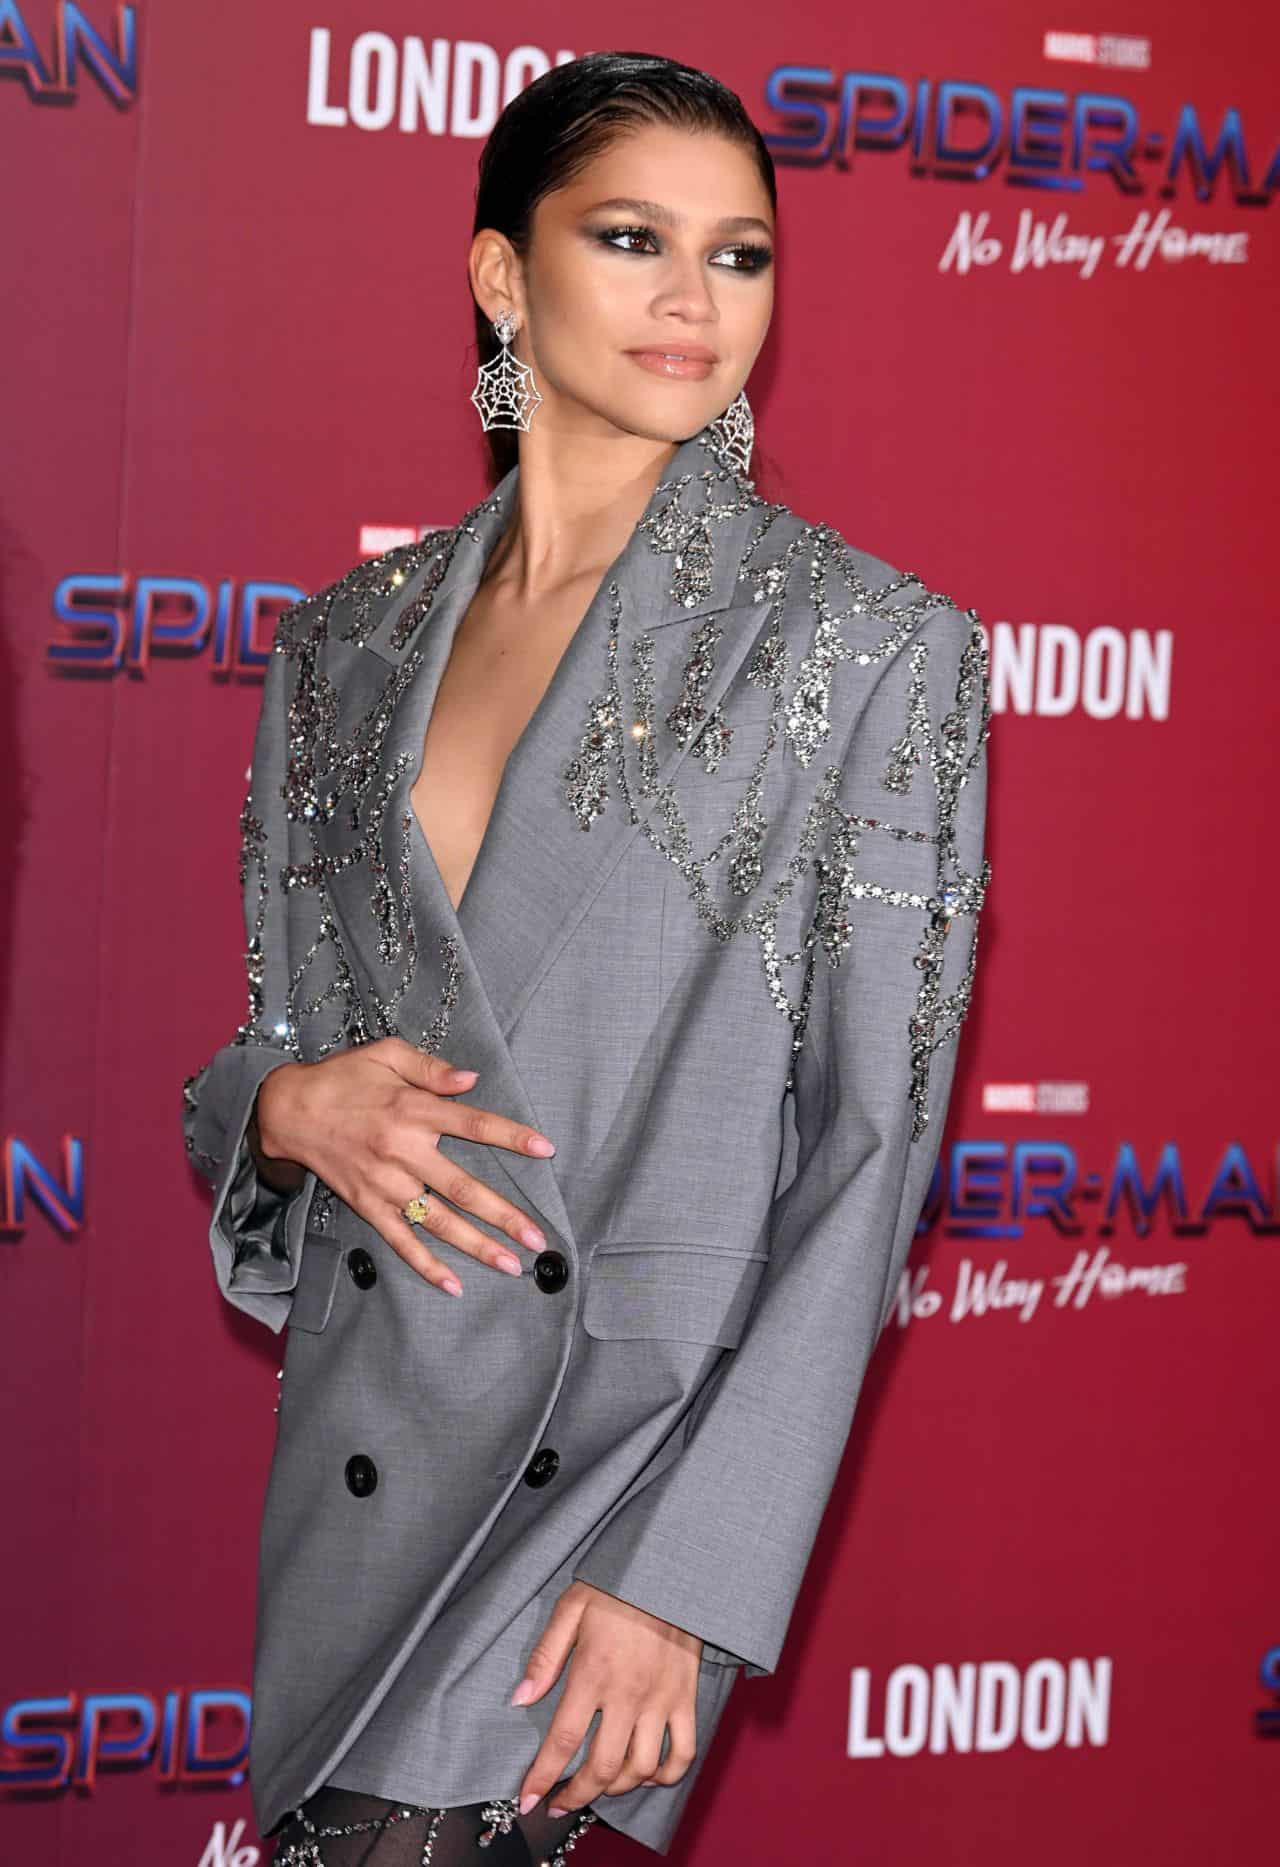 Zendaya Looked Chic at the “Spider-Man: No Way Home” Photocall in London